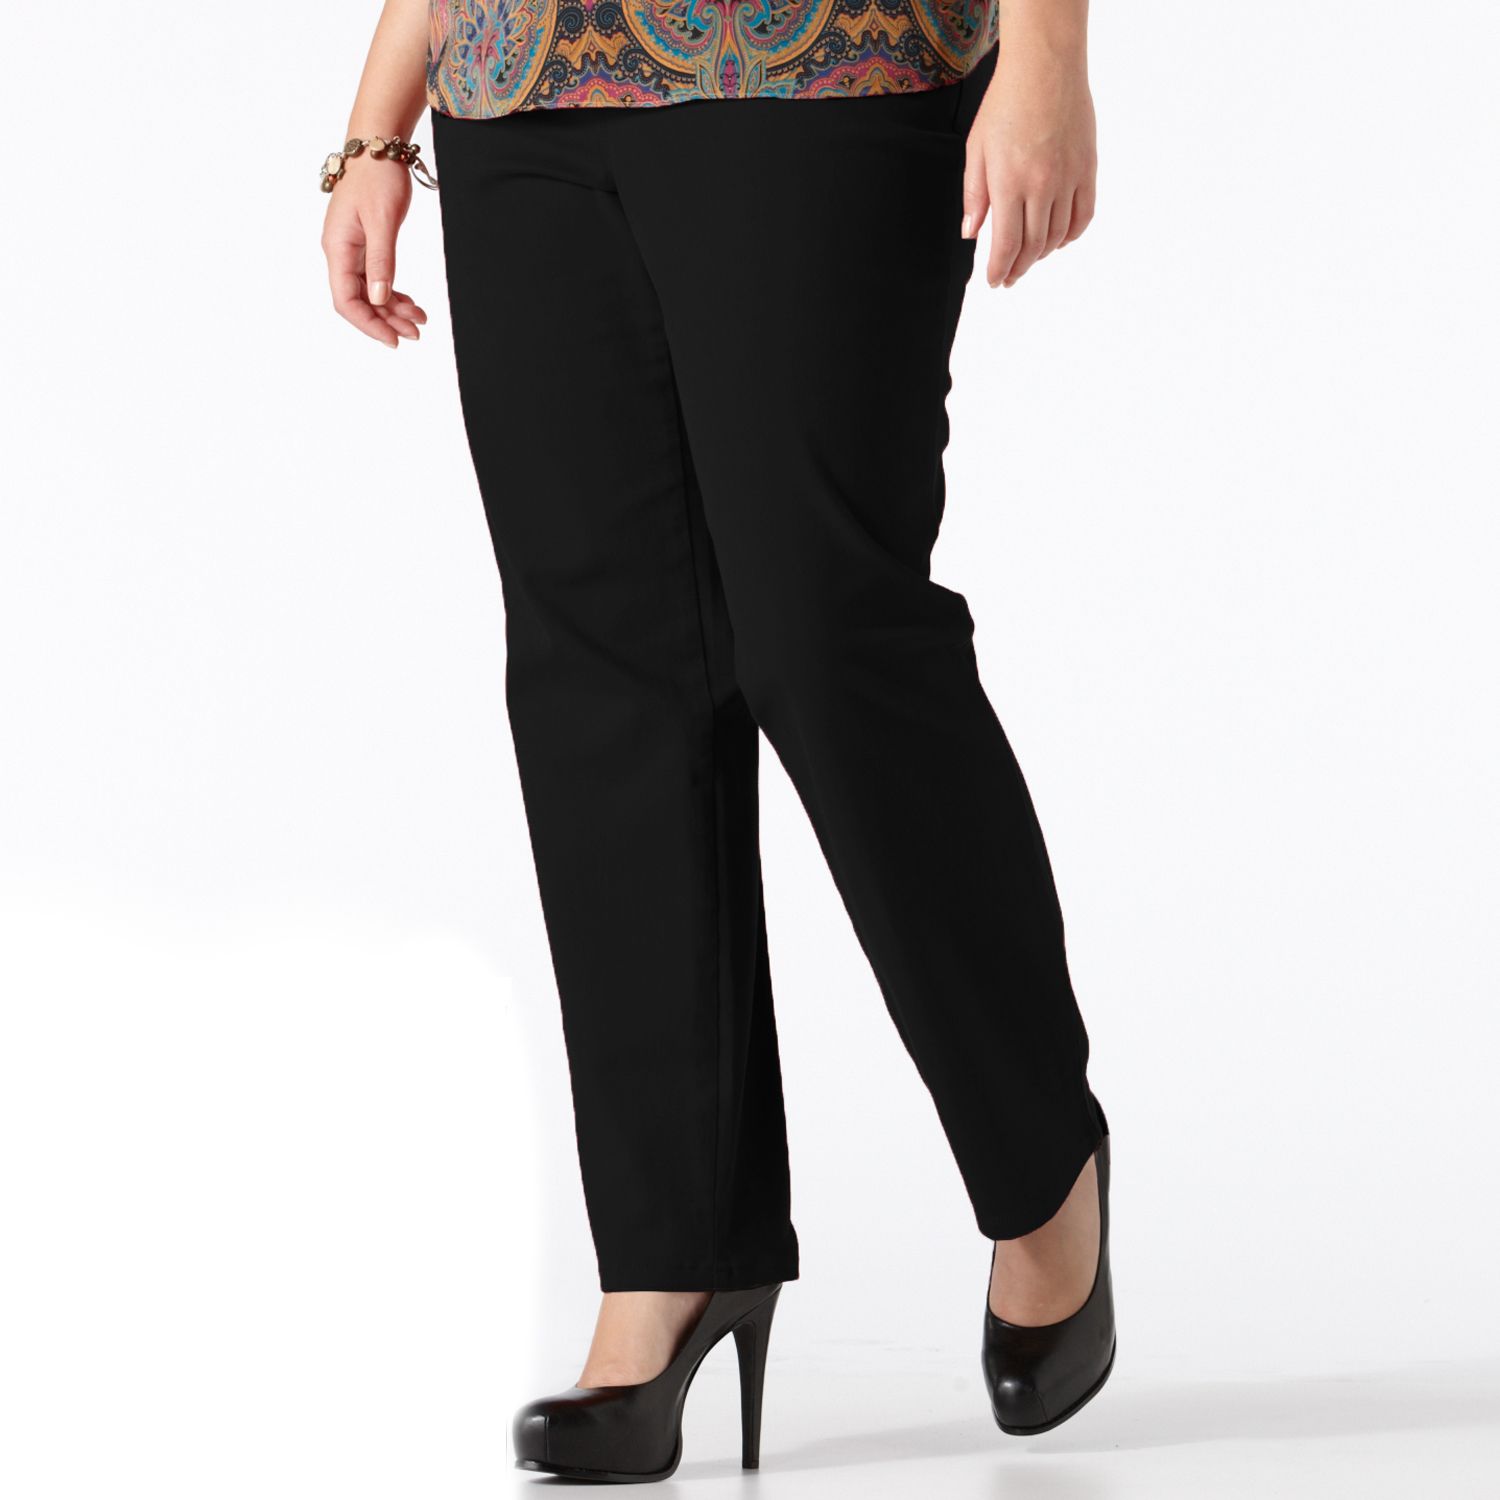 plus size tapered jeans